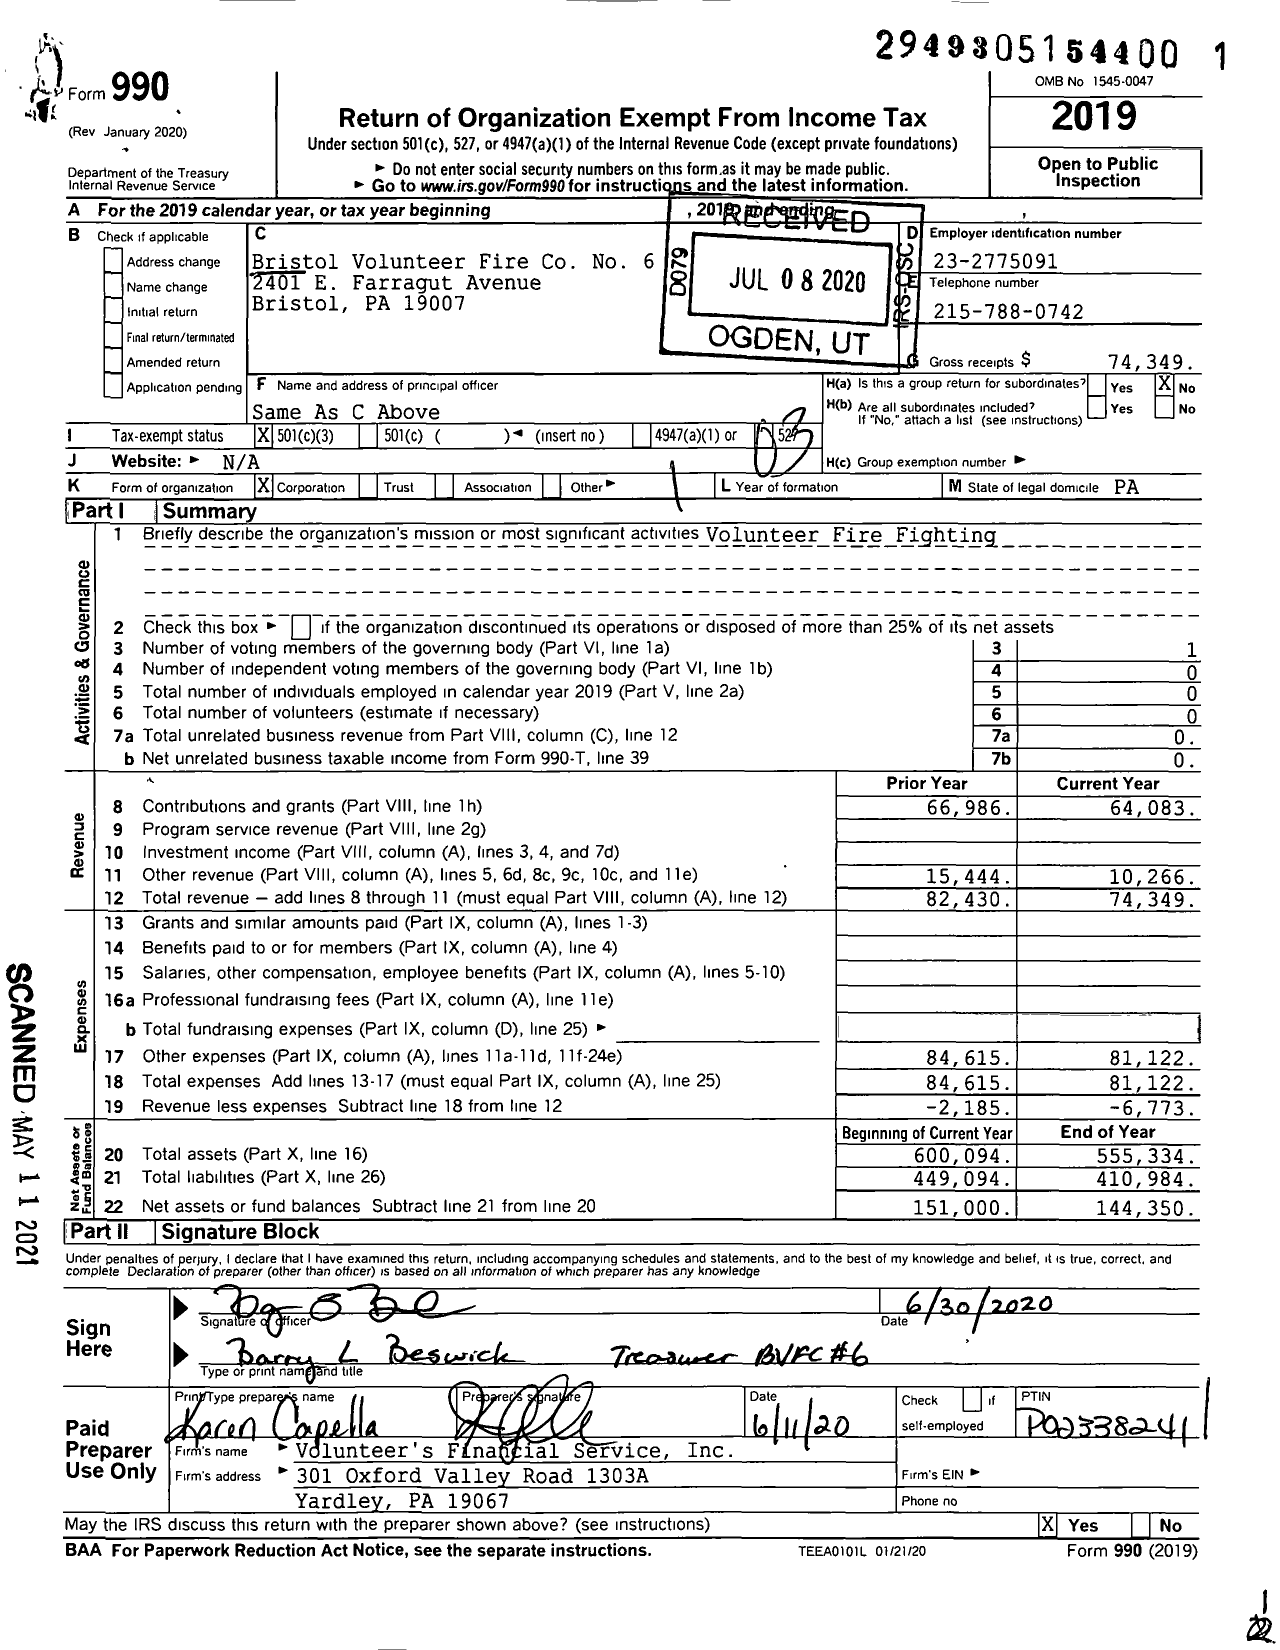 Image of first page of 2019 Form 990 for Bristol Volunteer Fire Co No 6